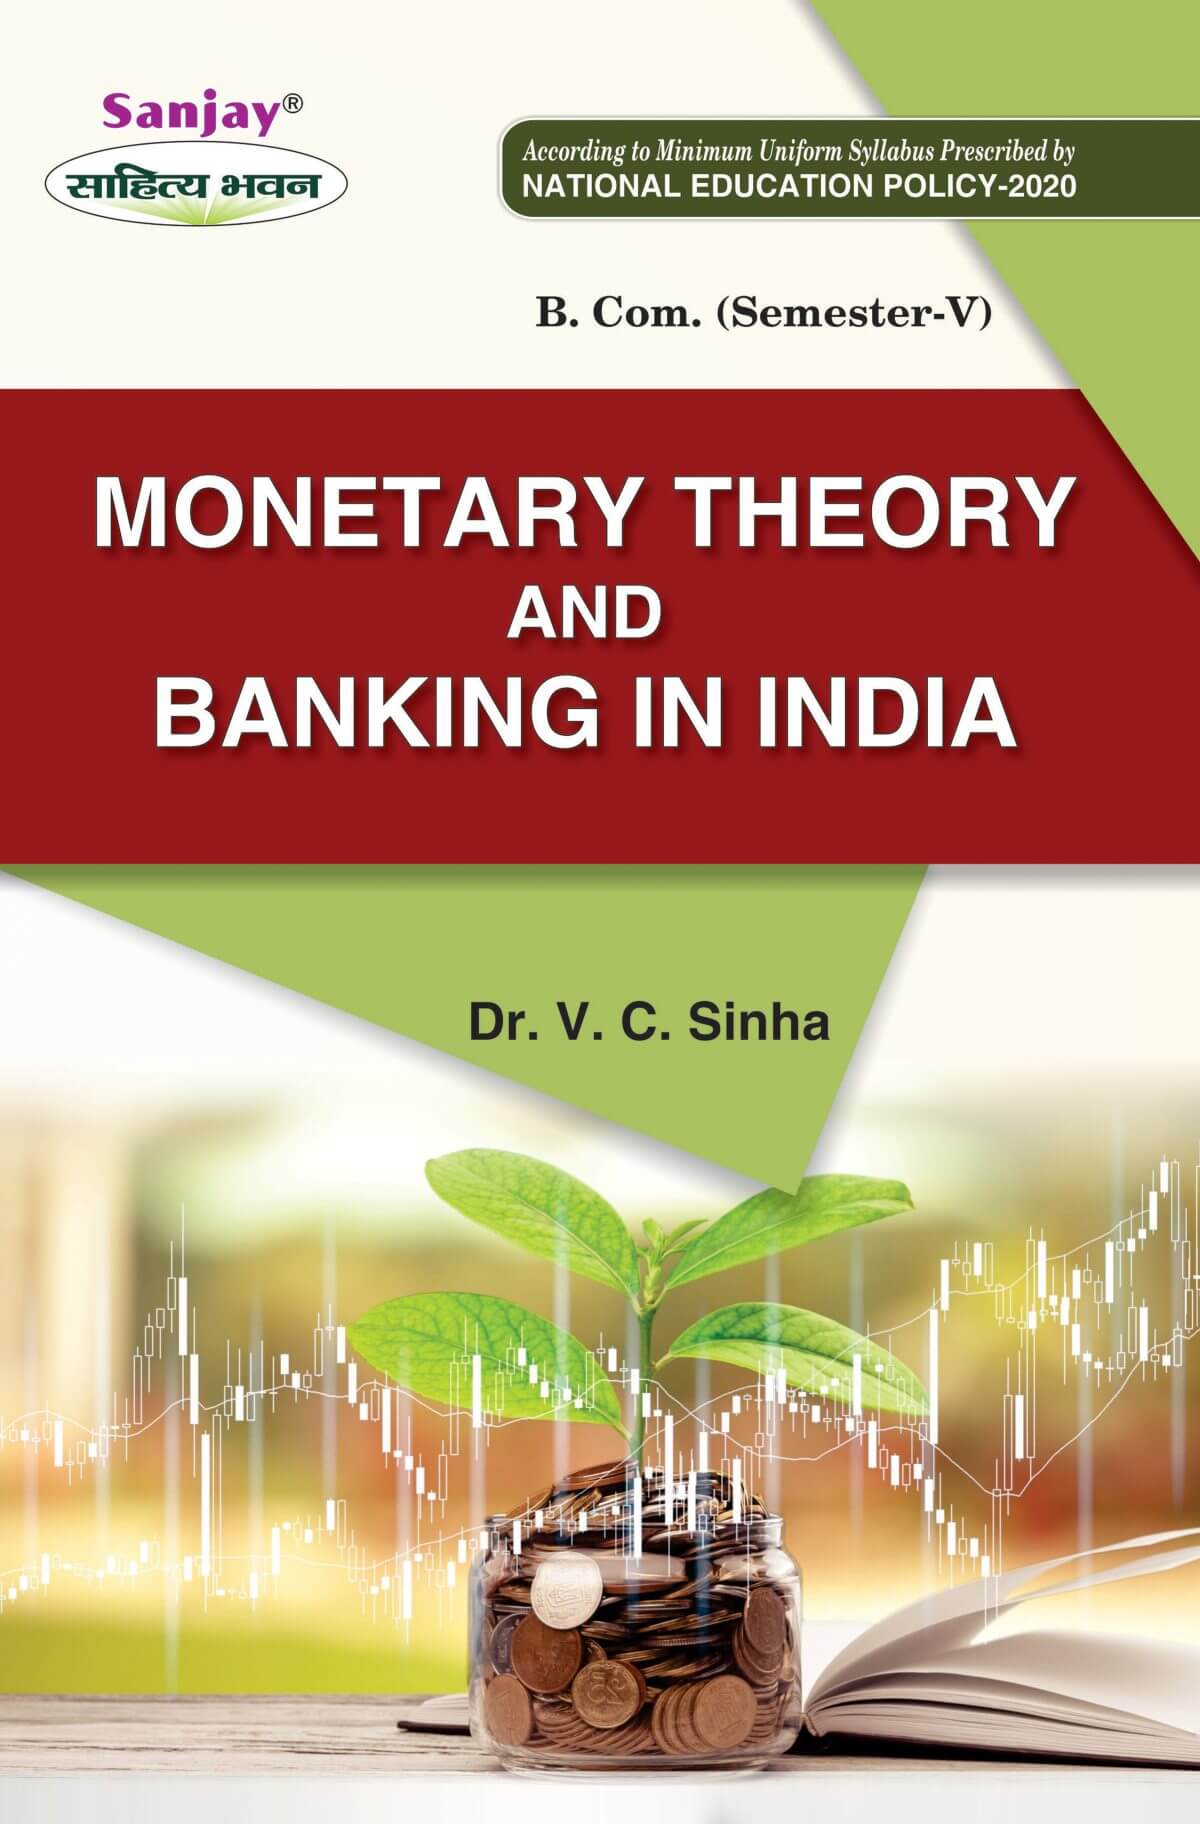 Monetary Theory and Banking in India